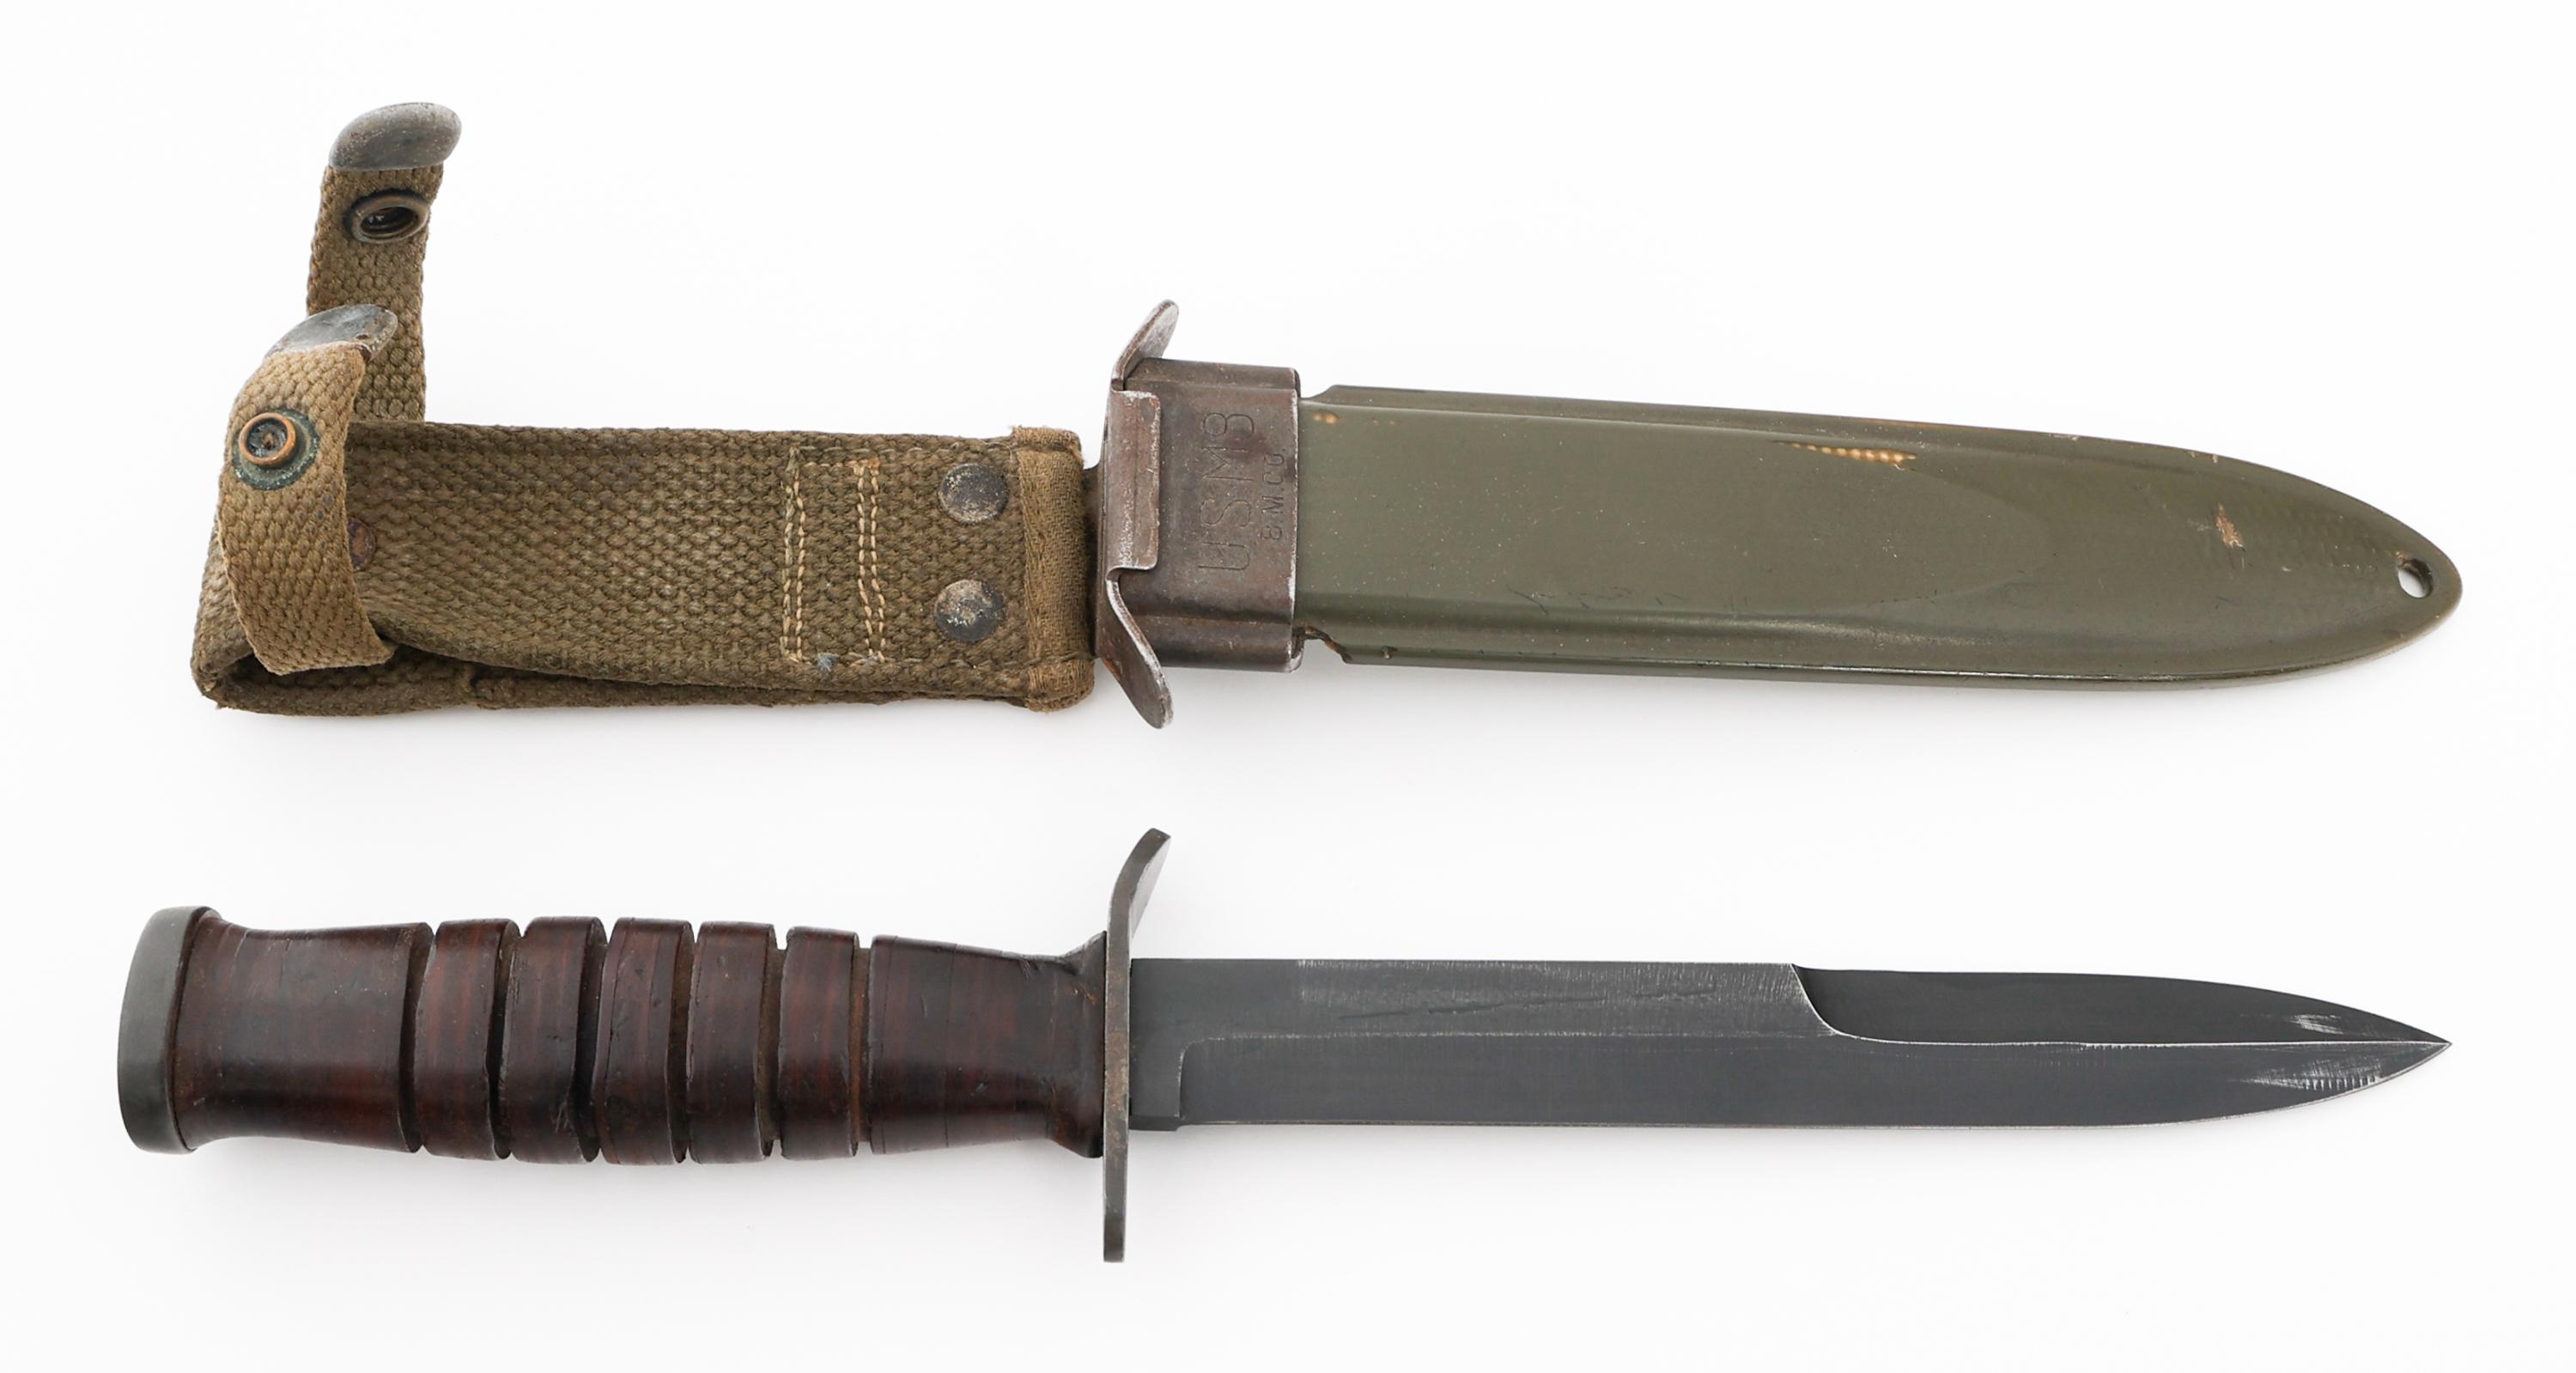 WWII US ARMY M3 FIGHTING KNIFE by PAL